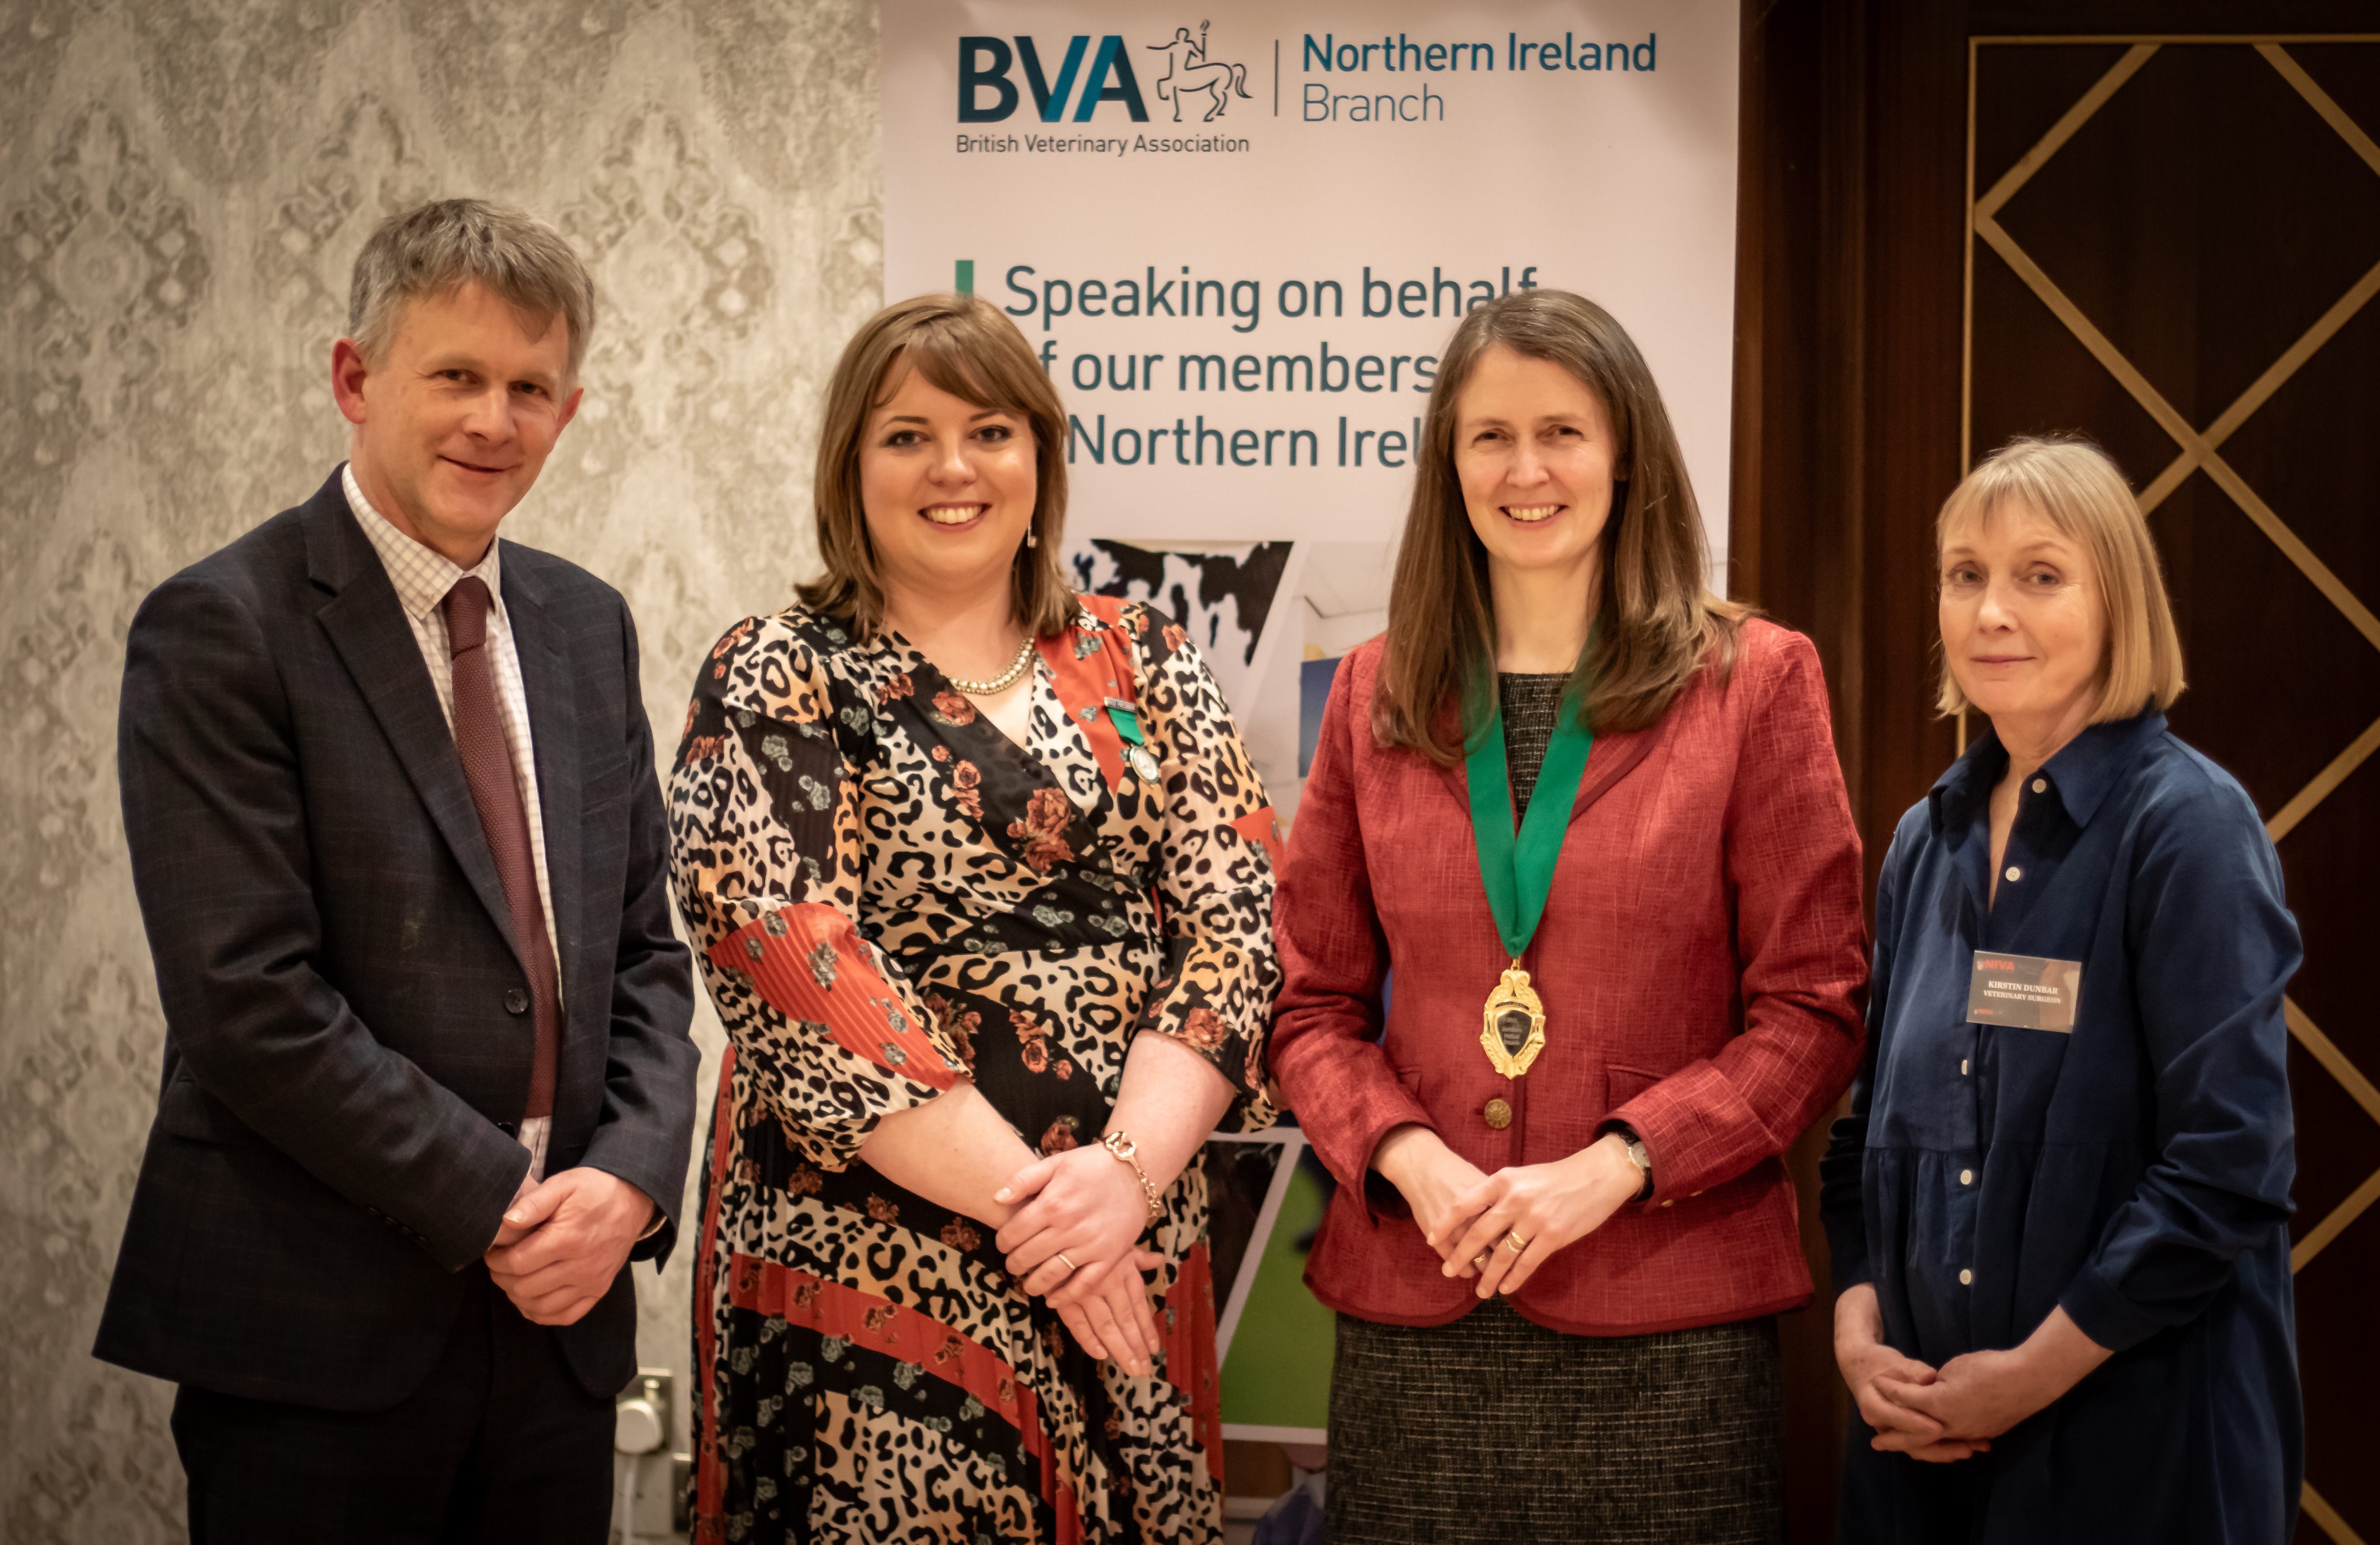 New President elected for BVA Northern Ireland Branch and North of Ireland Veterinary Association Image